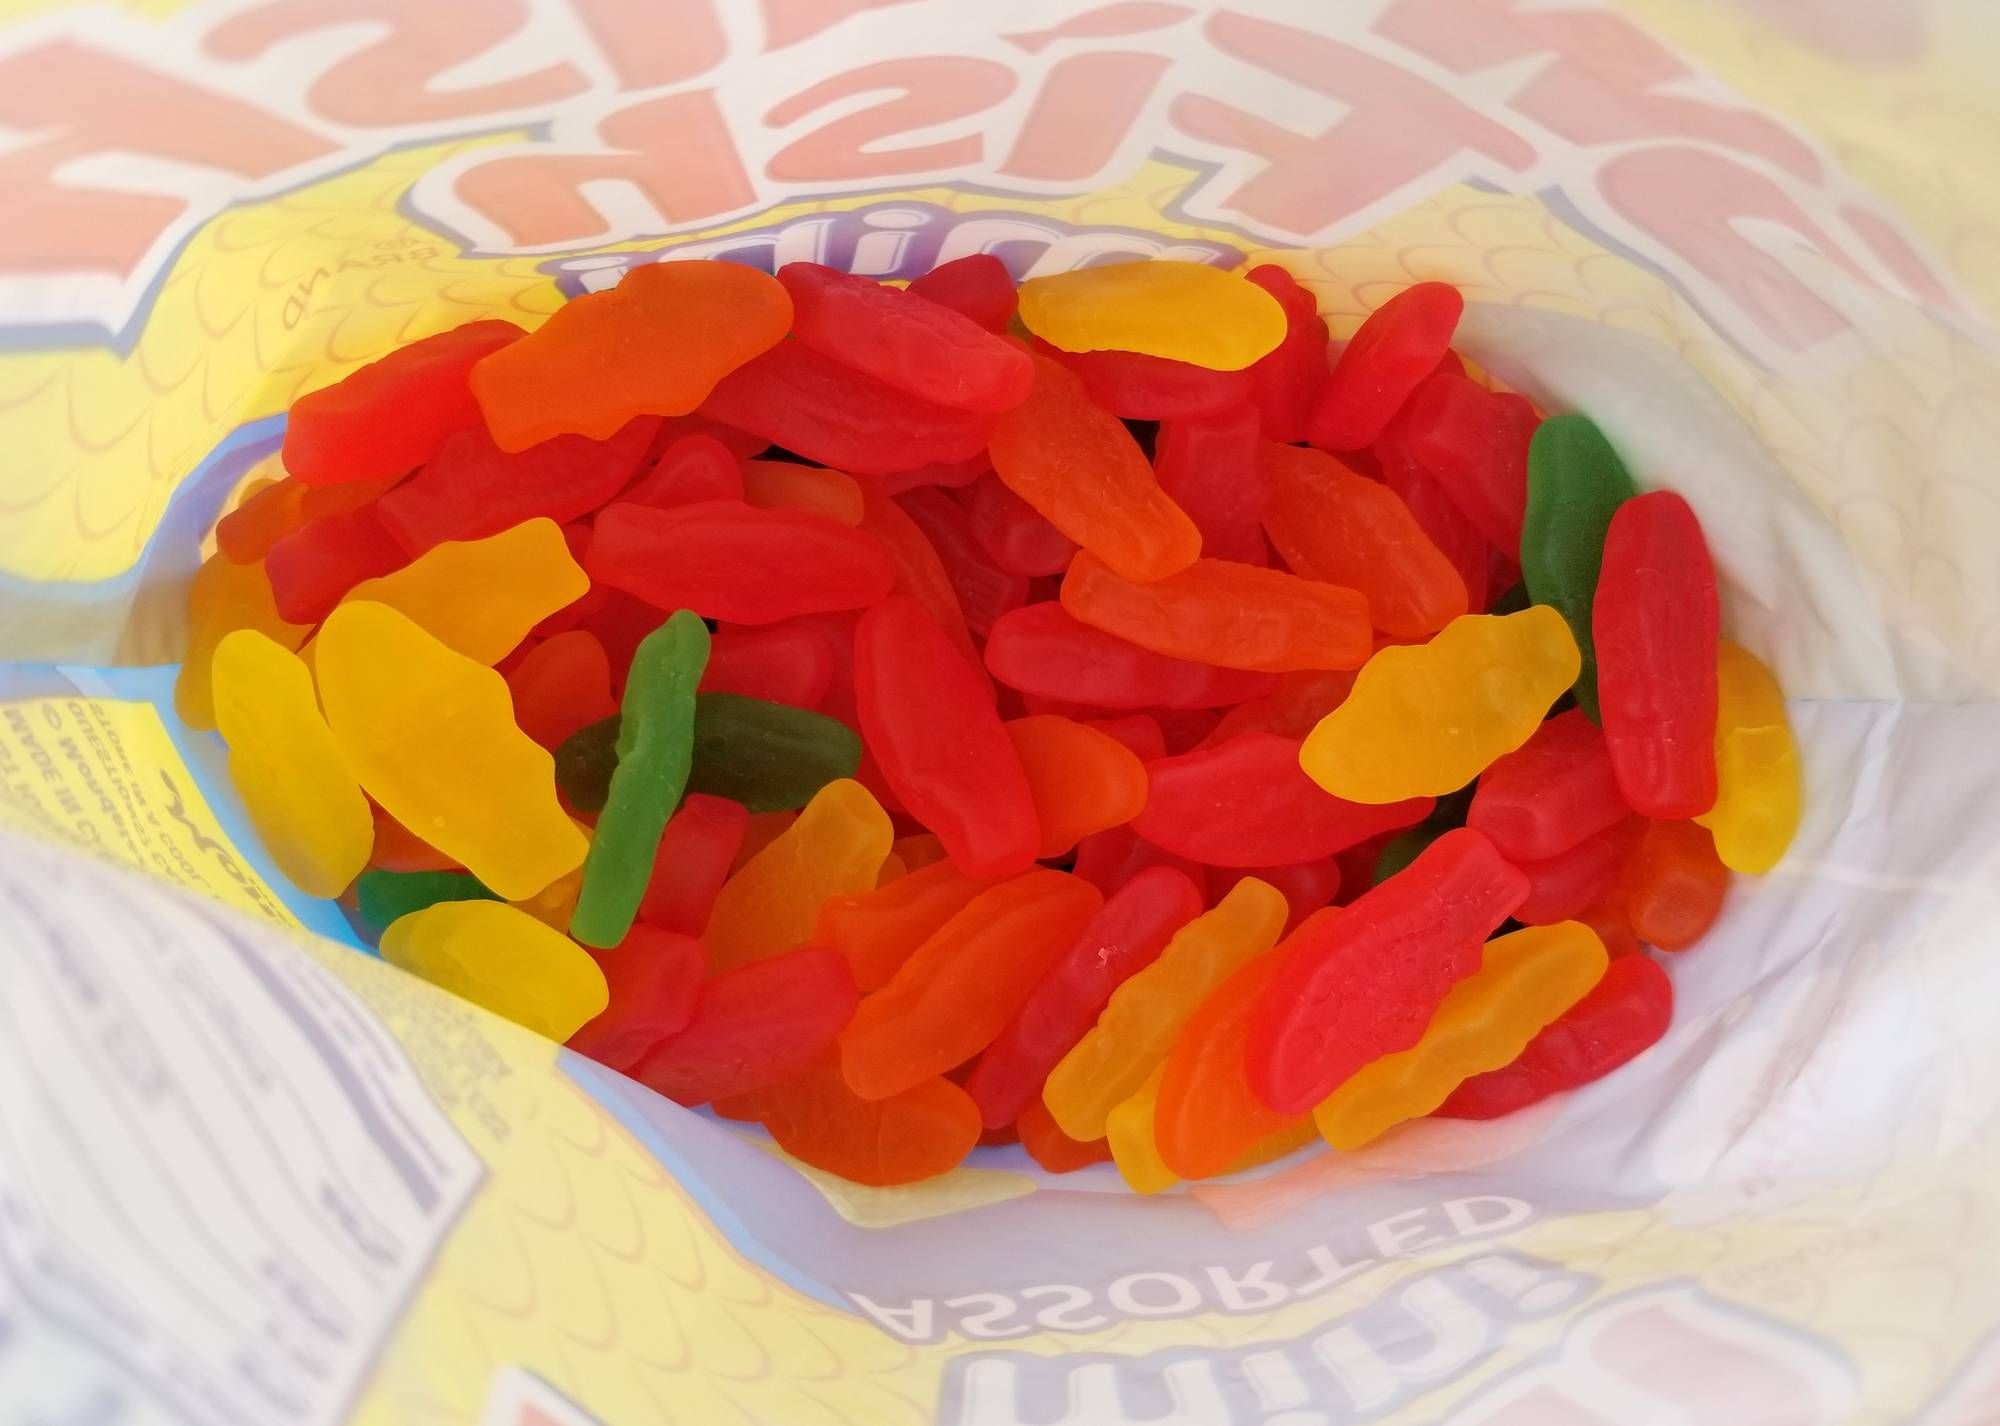 Swedish Fish candy boxes are allegedly underfilled.